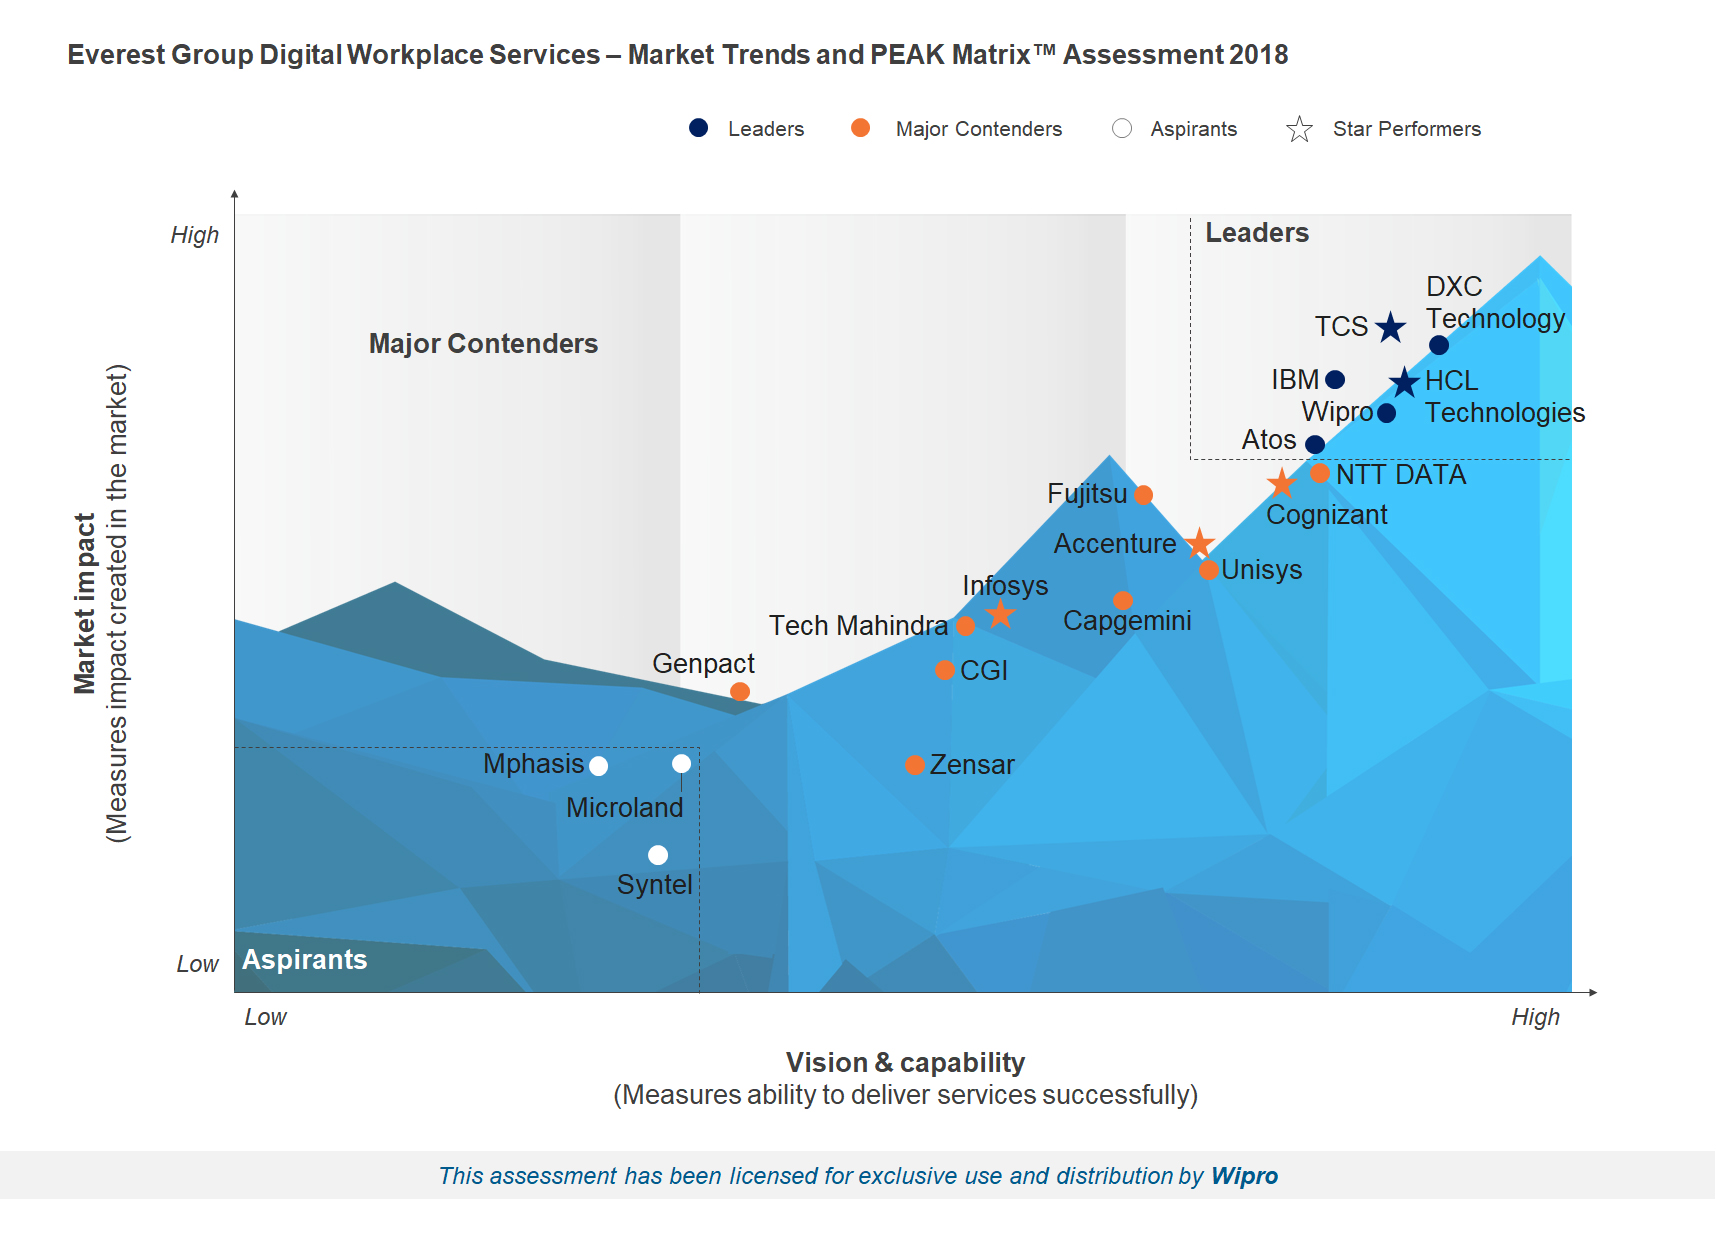 Wipro has emerged as a ‘Leader’ in the Everest Group’s PEAK matrix for Digital Workplace Services. 